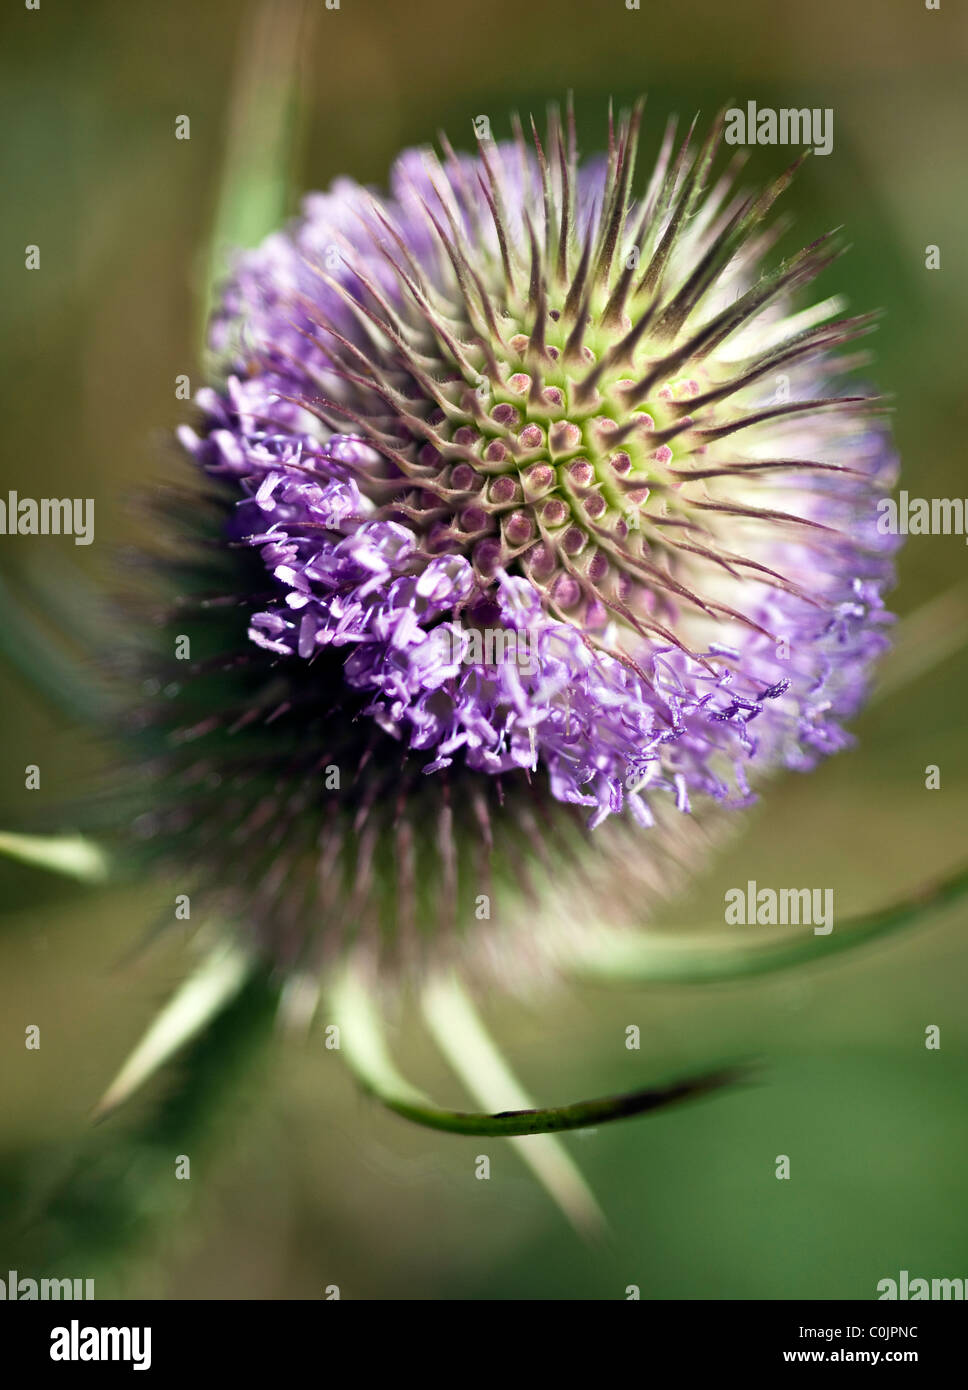 Macro image  of mauve thistle head  on location shot with shallow depth of field Stock Photo